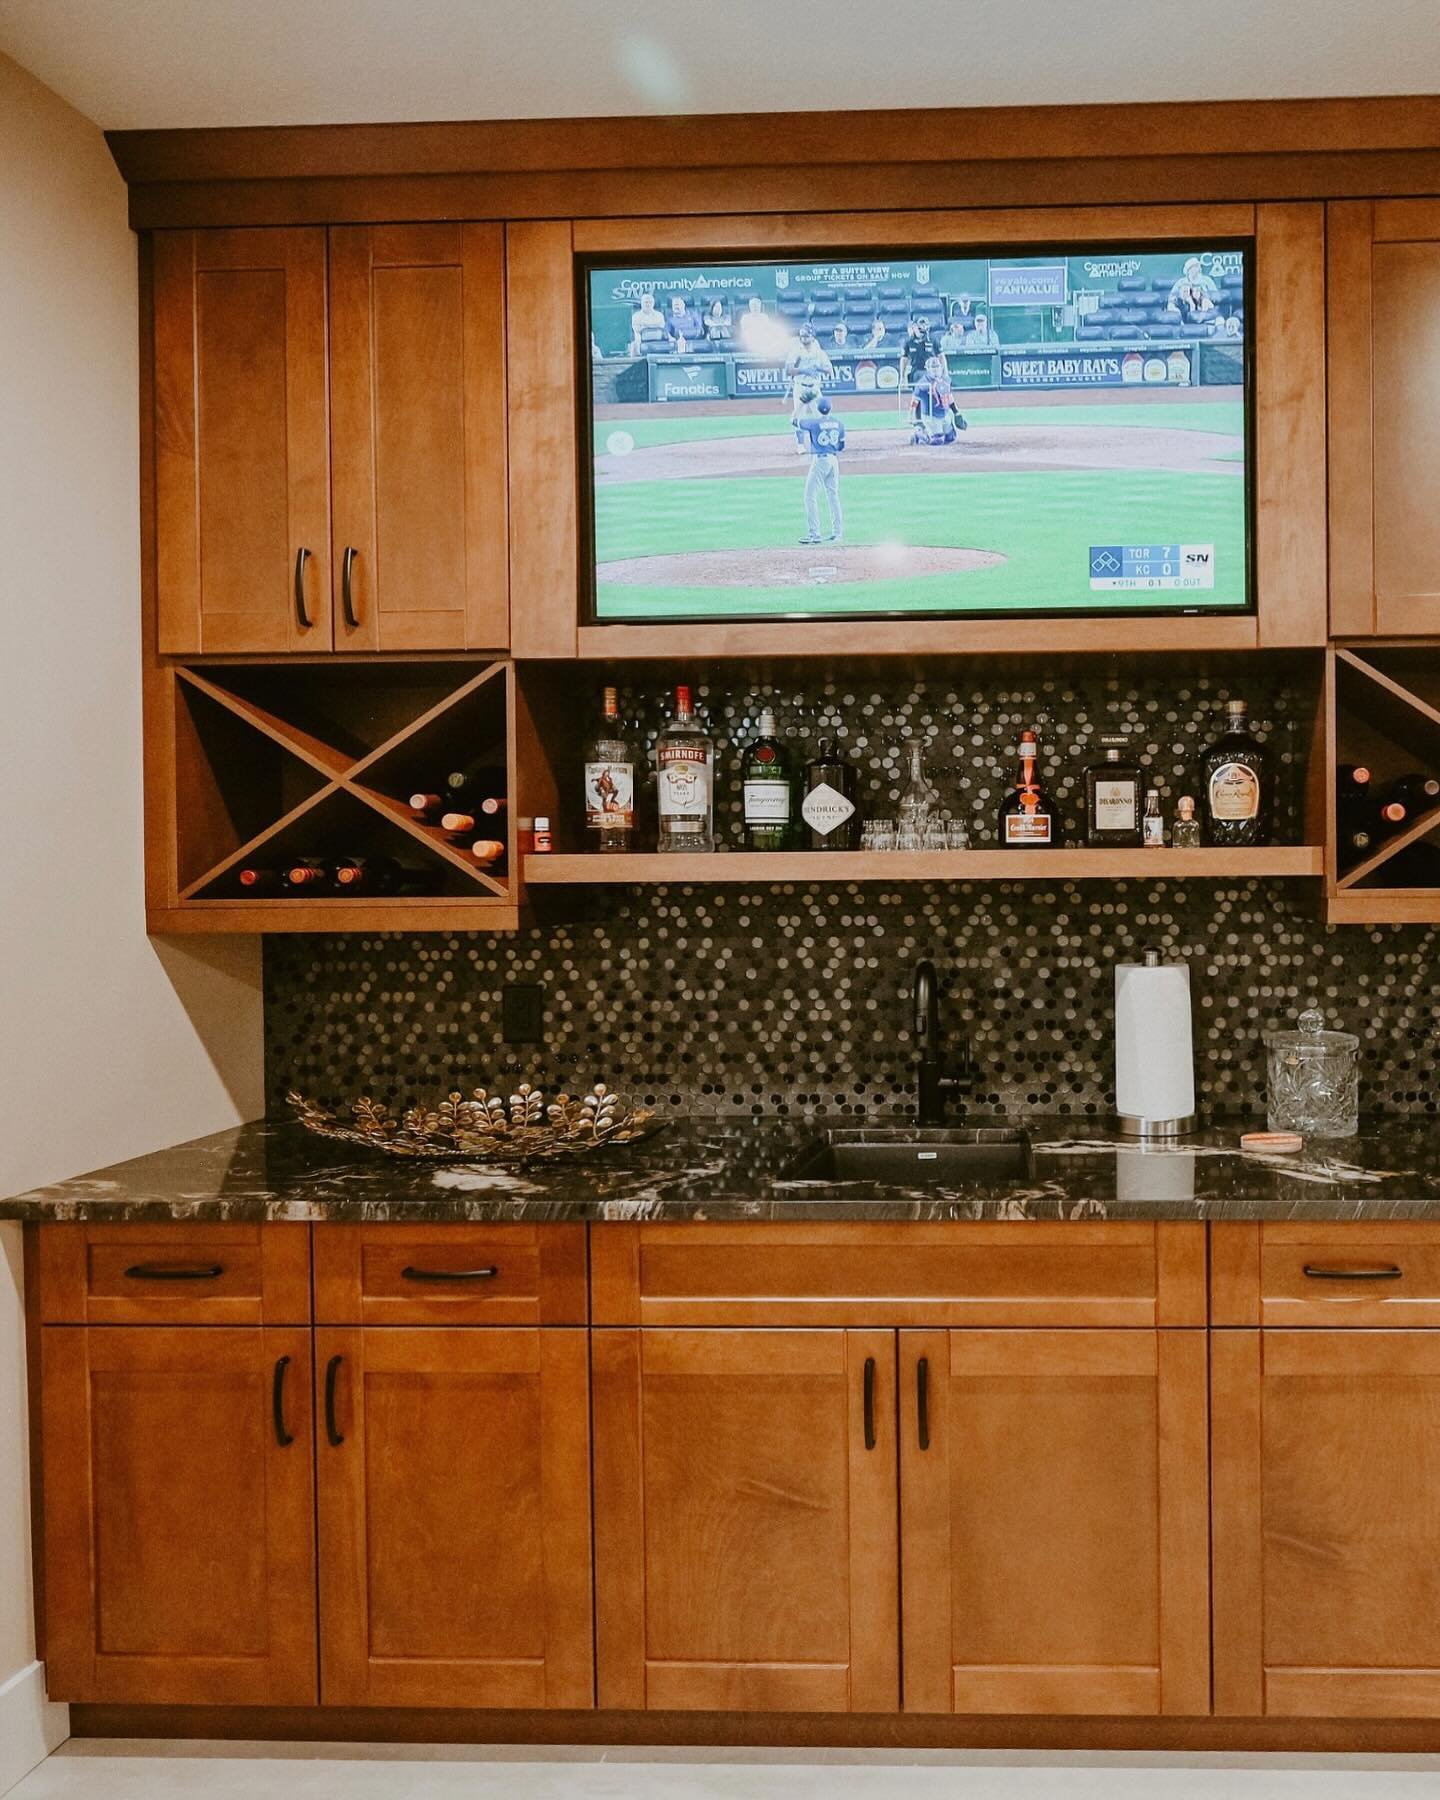 Transform your basement into the ultimate entertainment space! Whether you dream of a home theatre or a cozy wine cellar, we&rsquo;ll bring your basement conversions to life. #basementrenovation #homeentertainment 

Let us help you achieve your goals